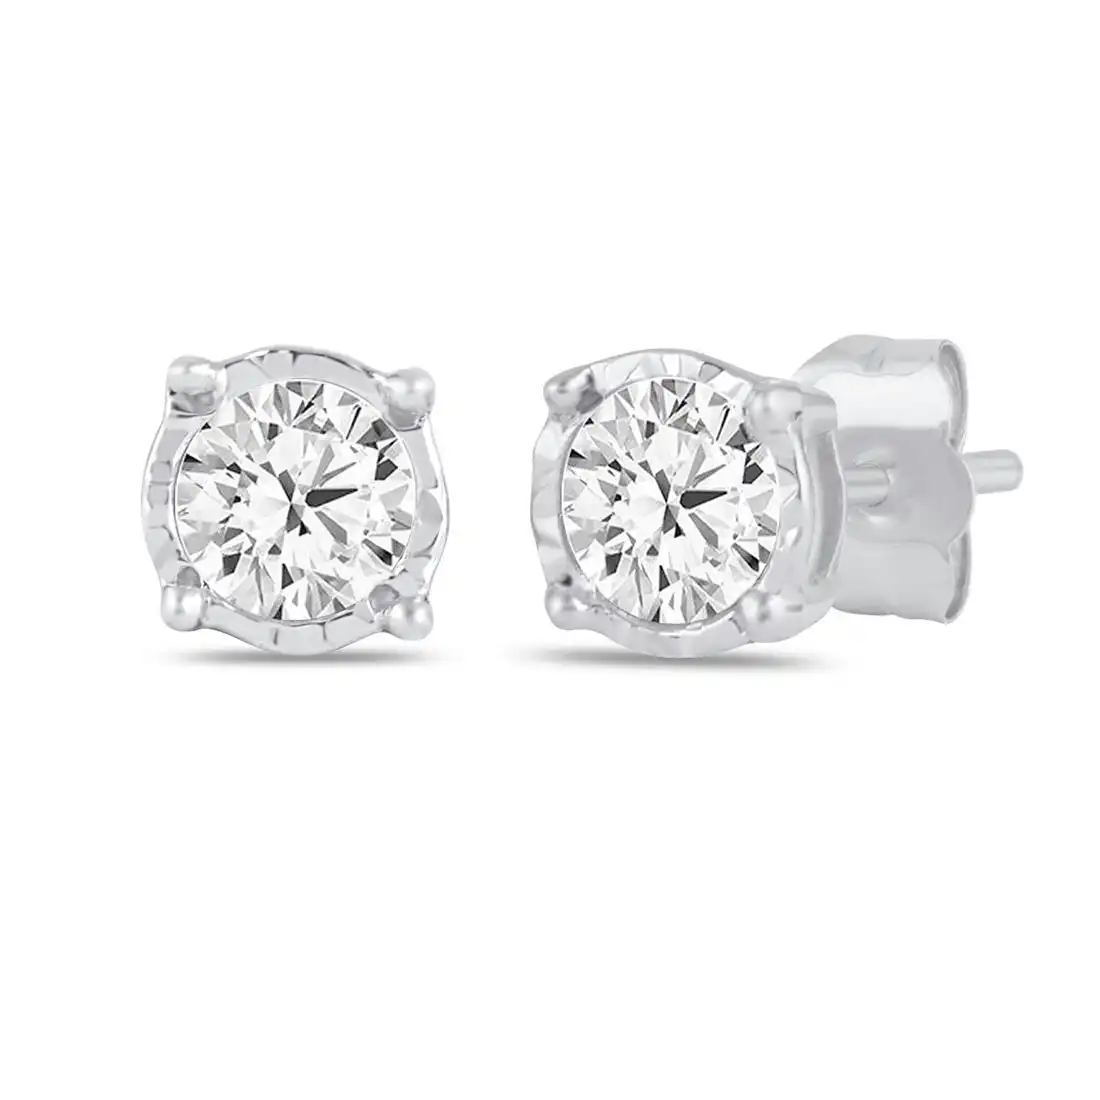 Tia Miracle Halo Stud Earrings with 1/5ct of Diamonds in 9ct White Gold